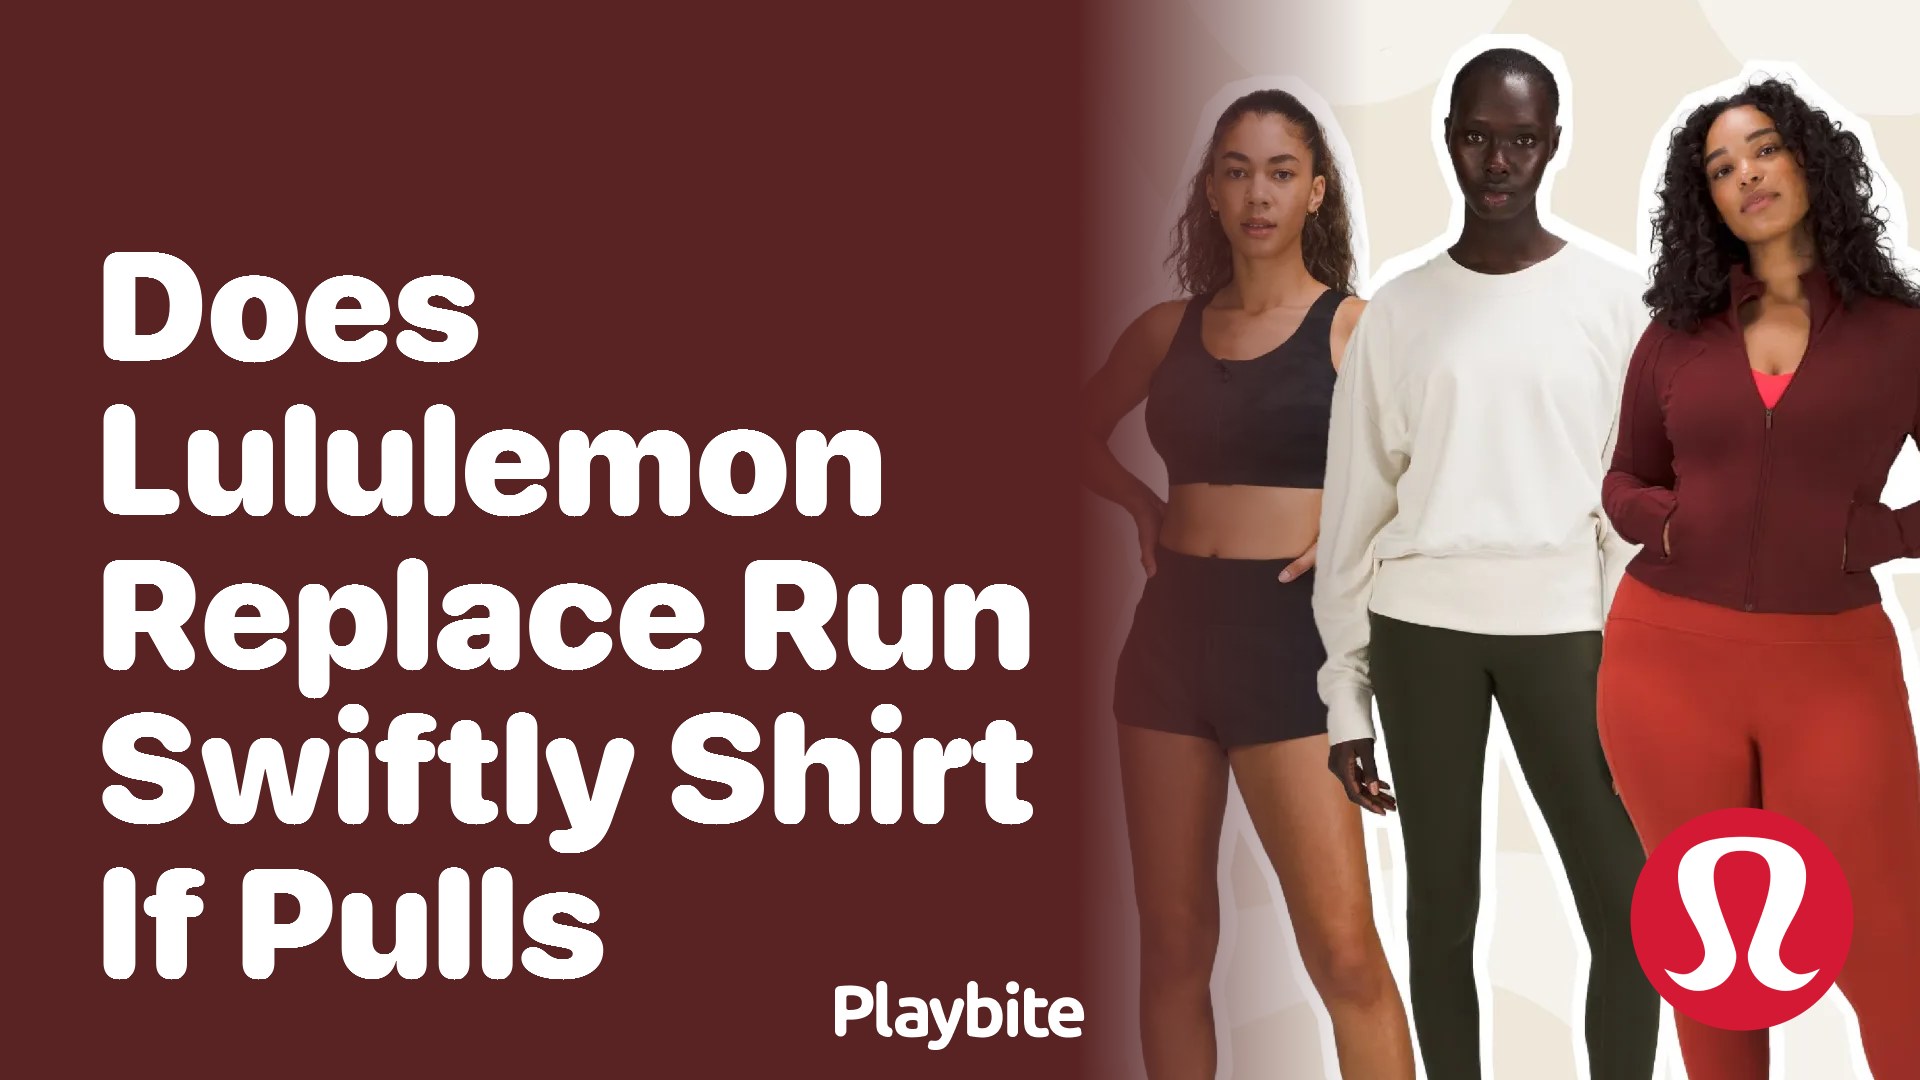 Does Lululemon Replace Run Swiftly Shirts if They Get Pulled? - Playbite